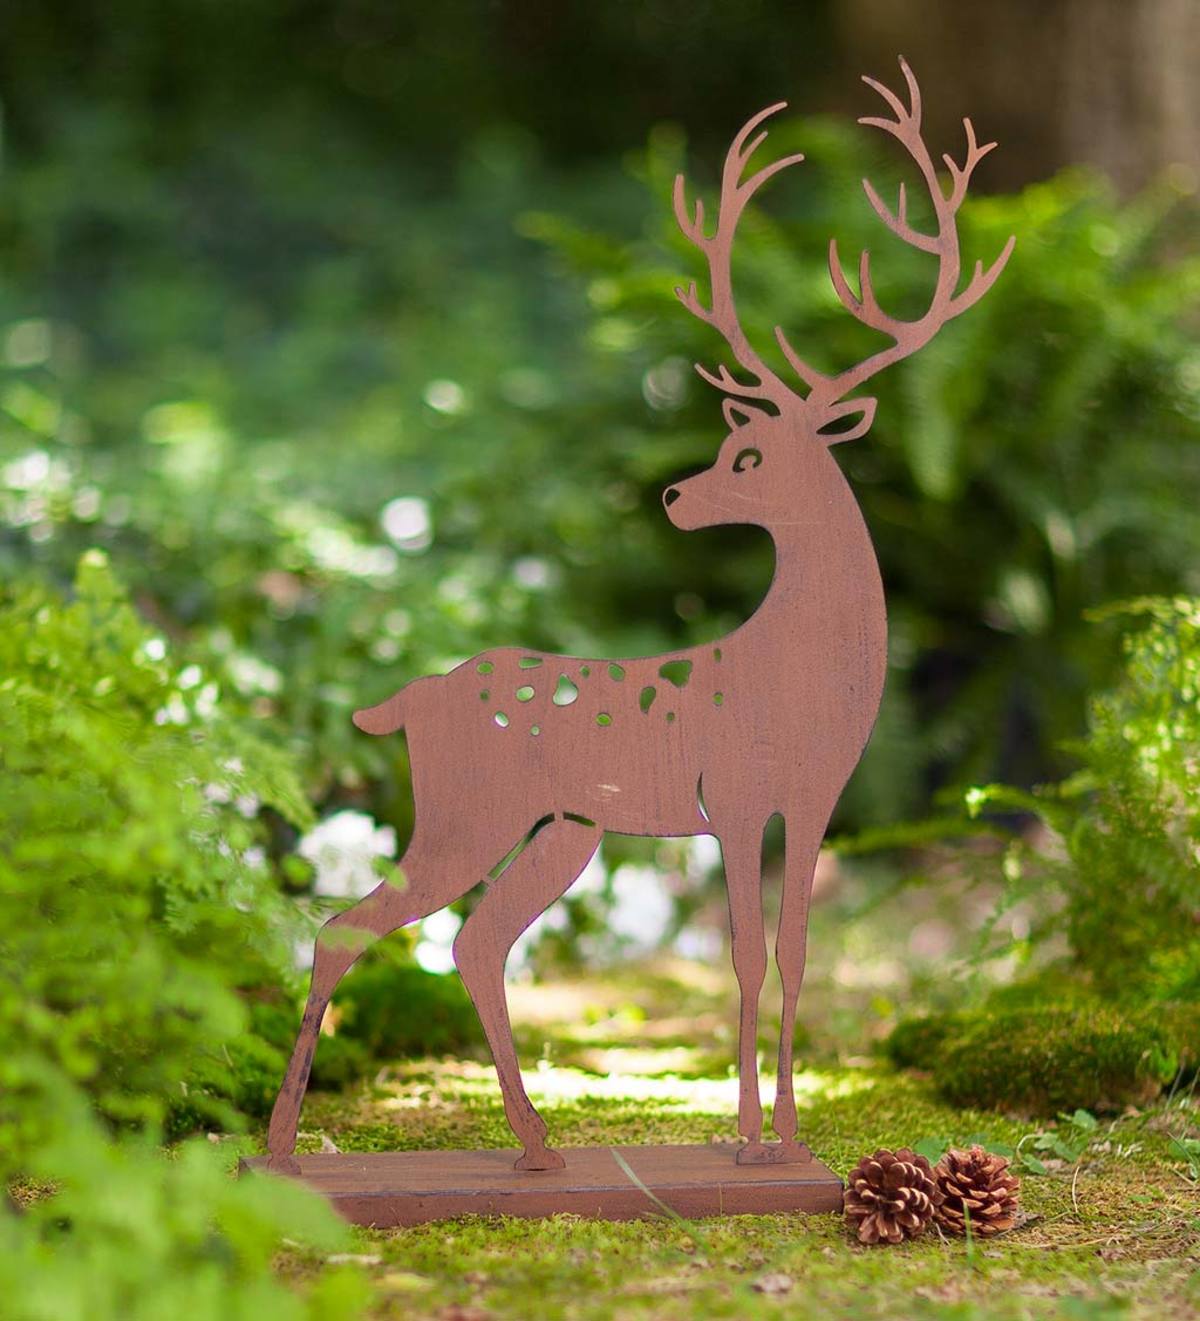 Laser-Cut Metal Deer Silhouette with Rusted Finish